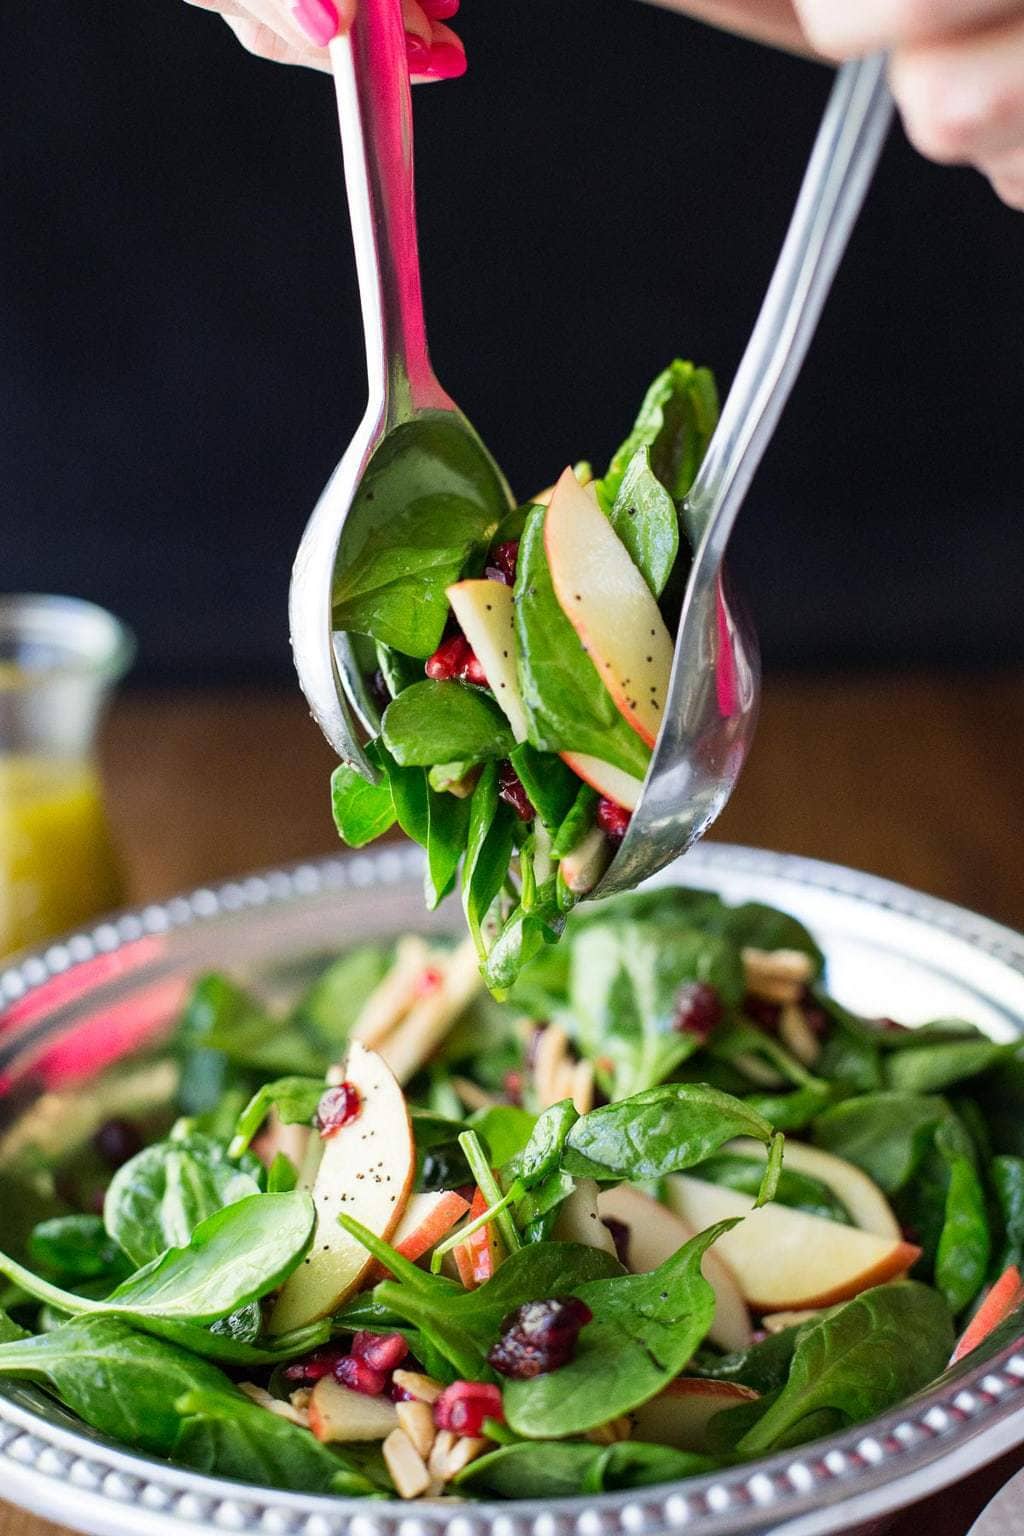 Vertical closeup photo of a Apple Cranberry Spinach Salad in a pewter serving platter with the salad being lifted up by salad serving utensils.